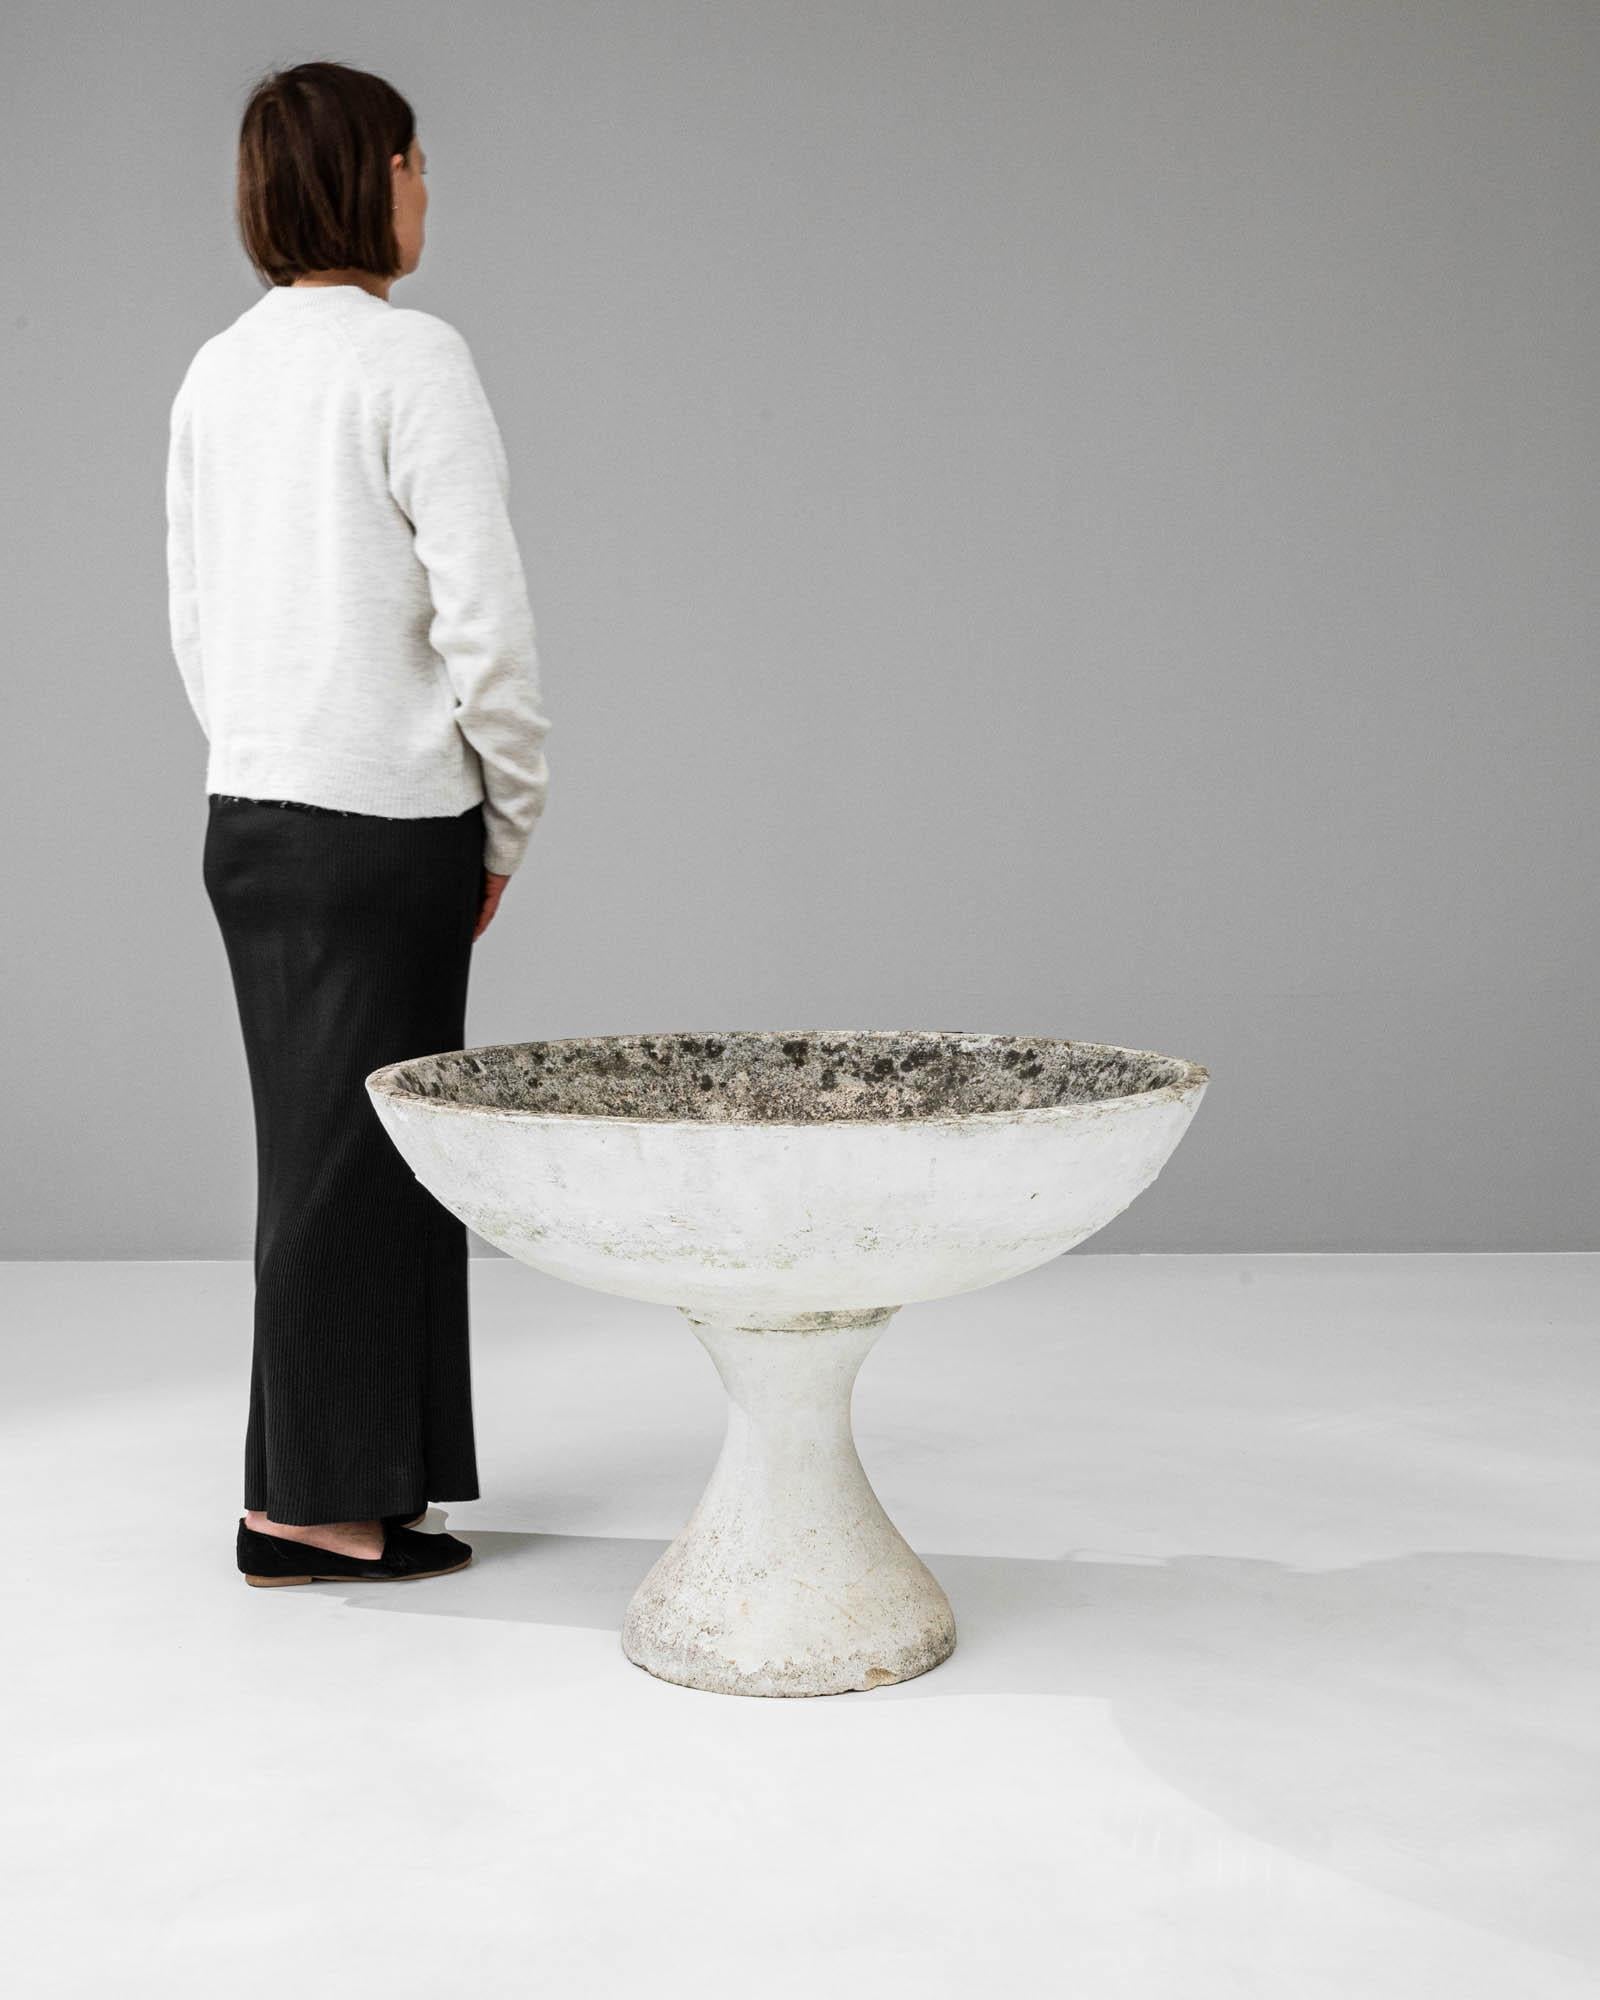 This 20th-century French concrete planter offers a sleek, minimalist silhouette that blends the roughness of its material with a design that exudes modern elegance. The chalice-like shape draws inspiration from classical forms, while the raw,